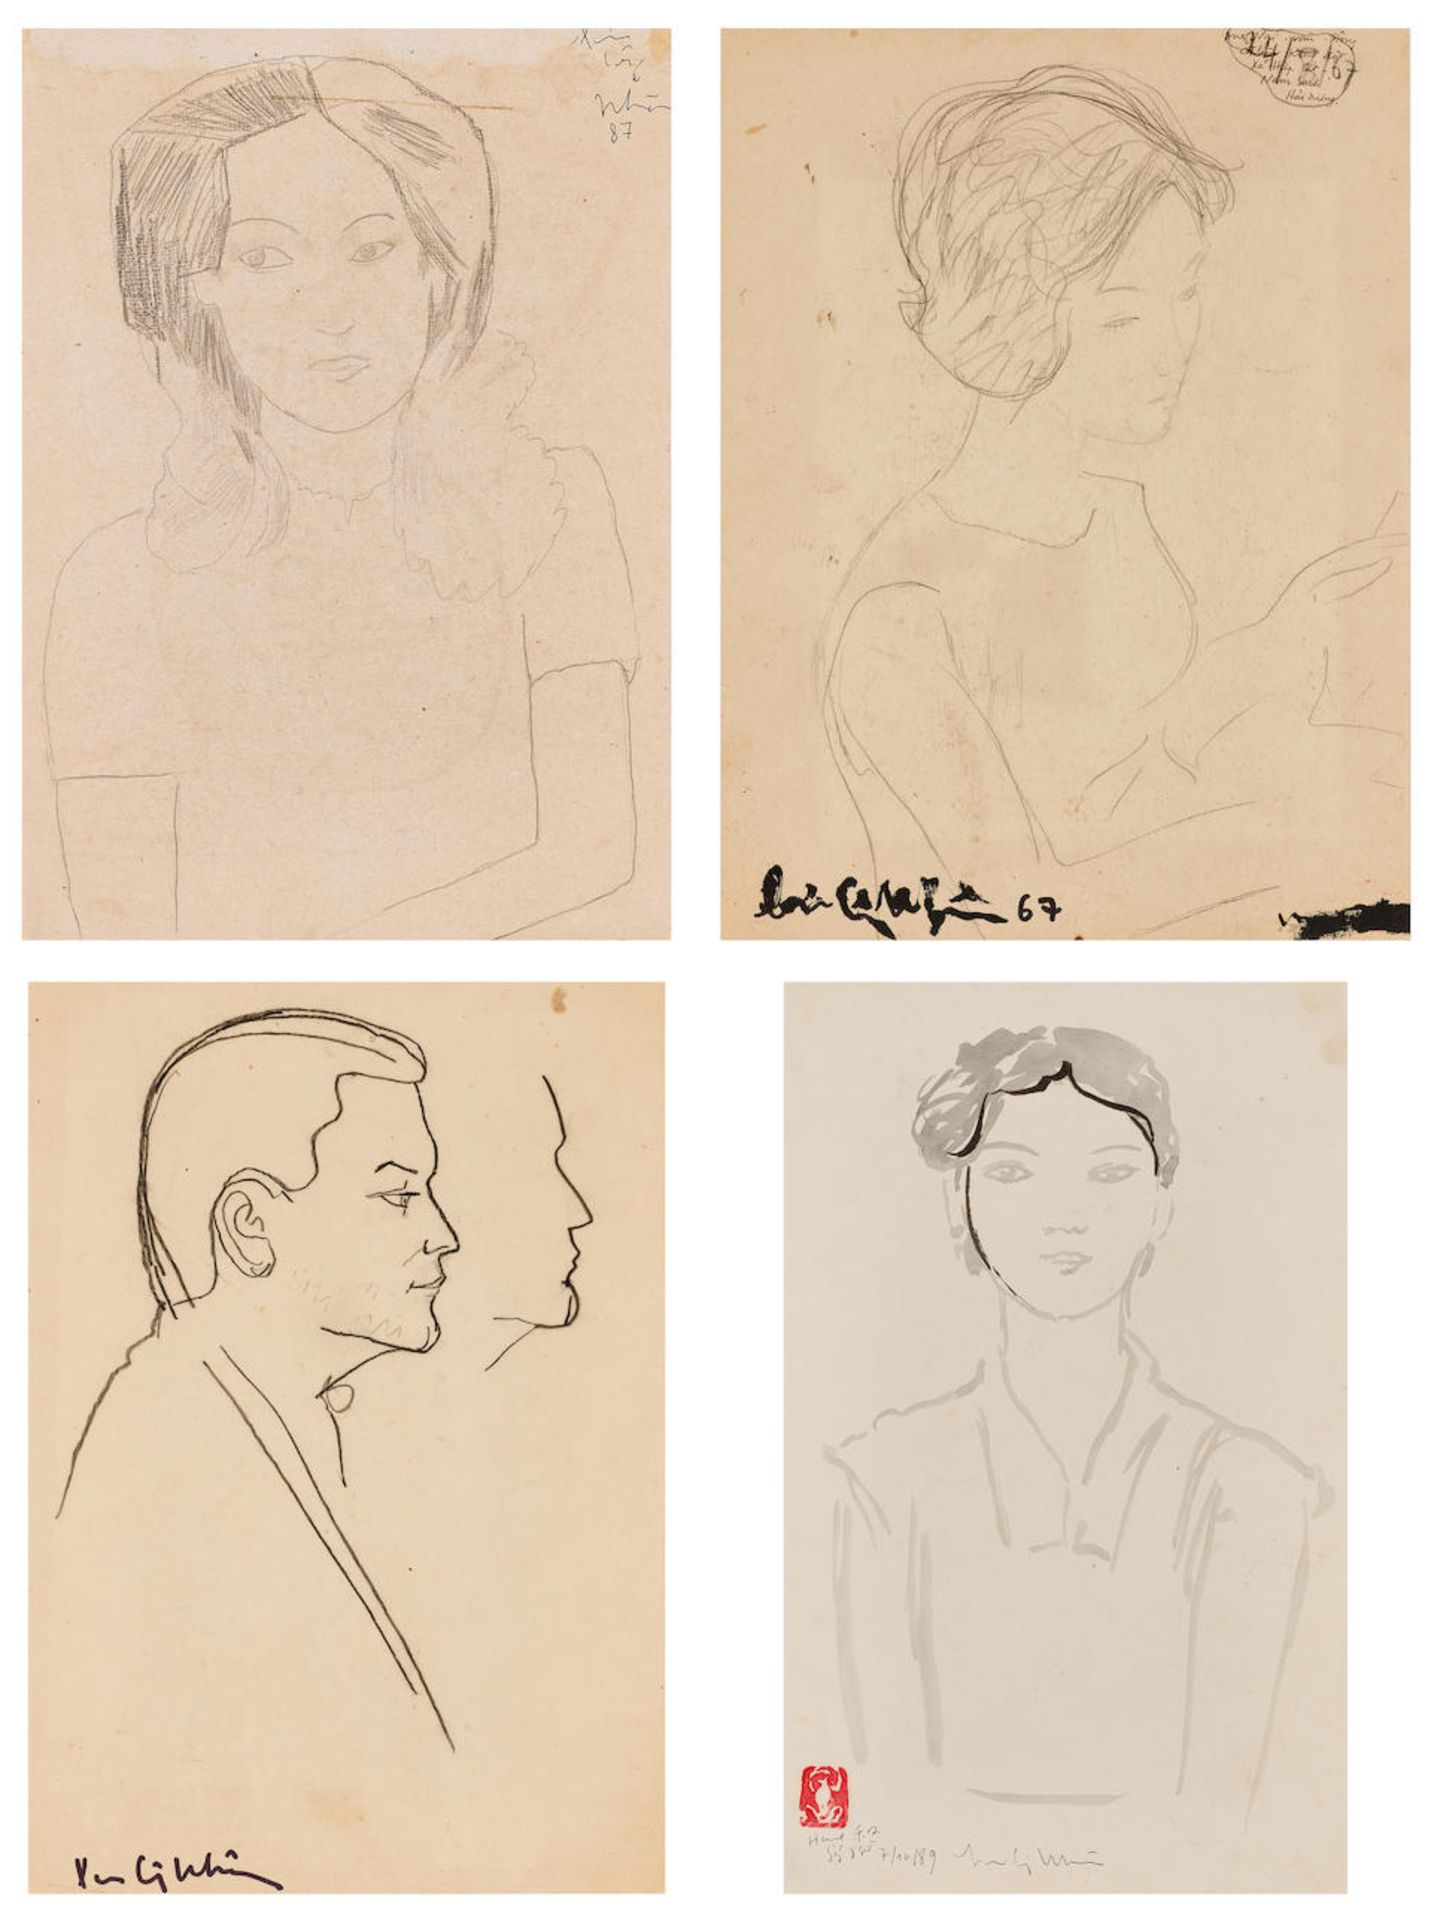 Luu Cong Nhan (Vietnamese, 1931-2007) Four drawings with portrait